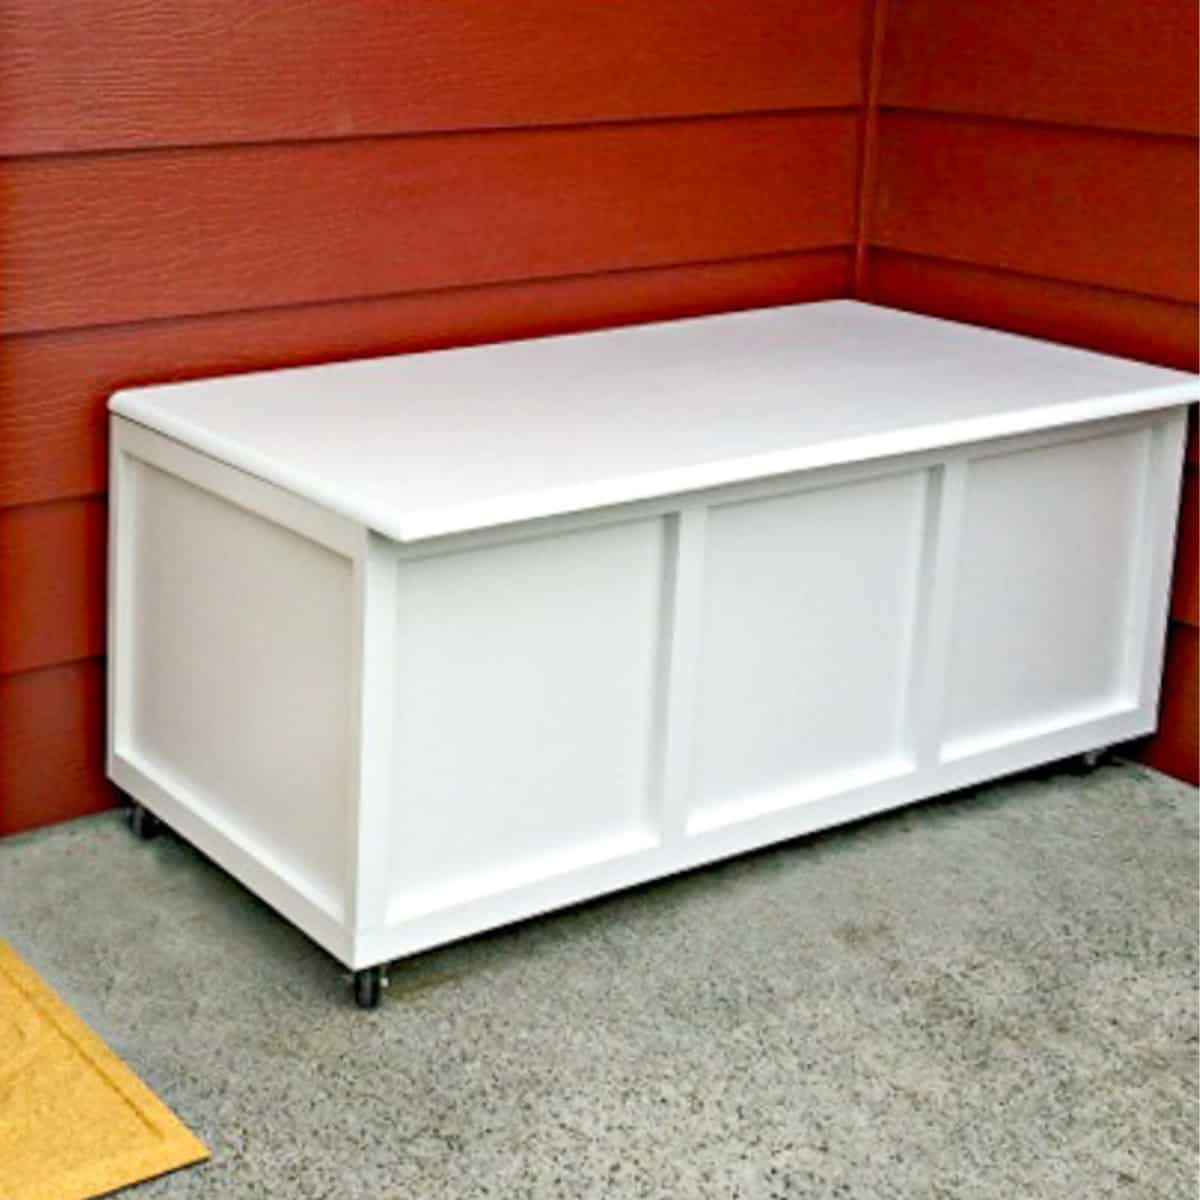 https://www.thehandymansdaughter.com/wp-content/uploads/2015/10/DIY-storage-bench-with-hinged-lid-featured-image.jpeg